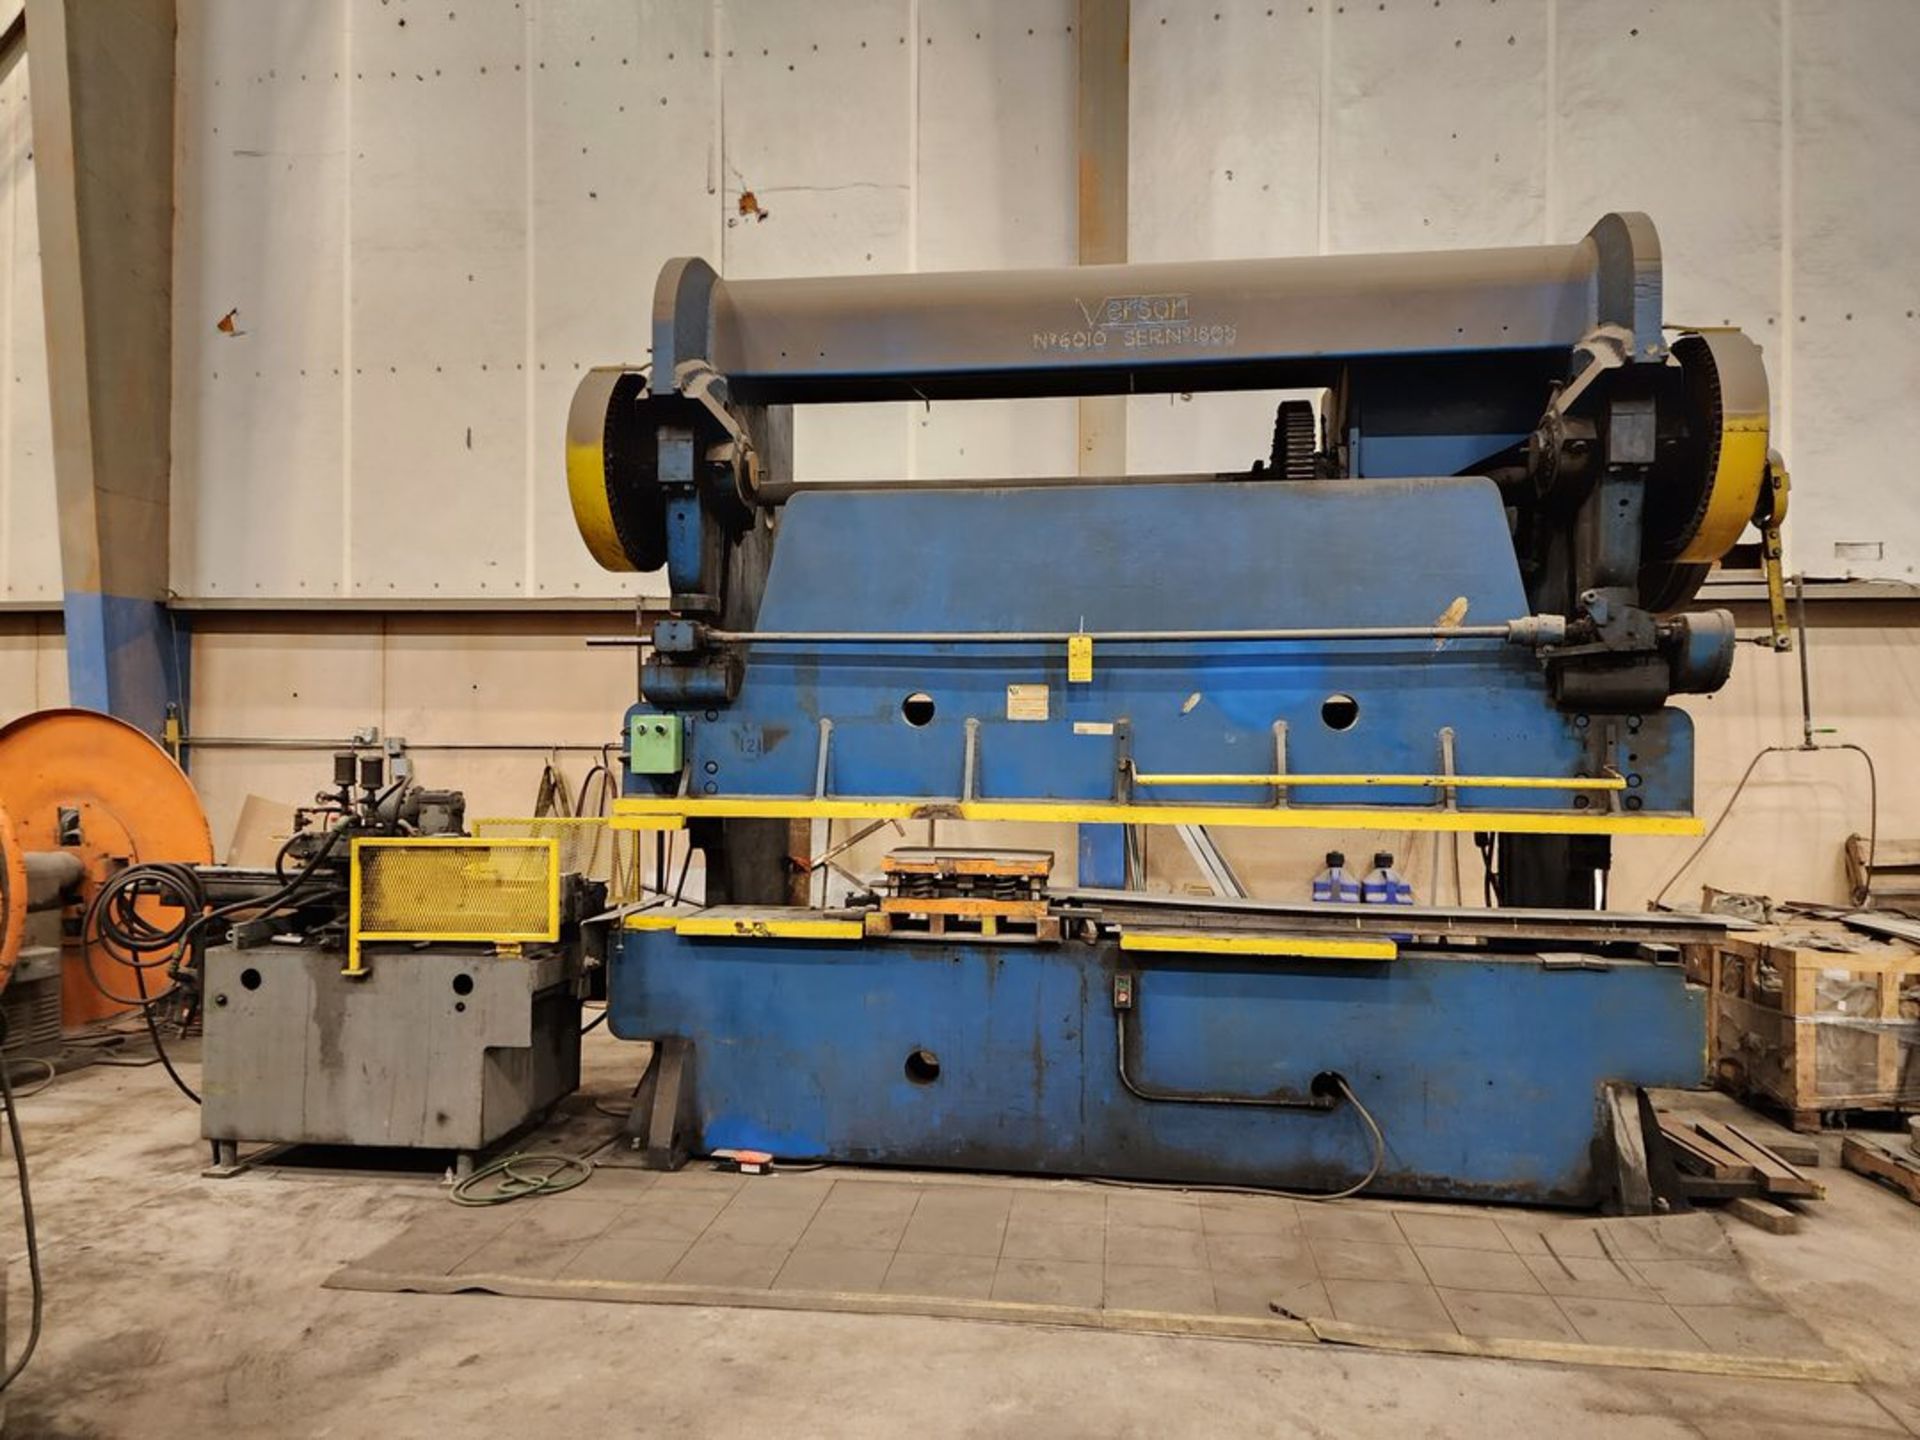 Verson 6010 60Ton Punch Press 10' Bed, W/ Foot Control, W/ Coil, W/ Stl. Plates; (No Tag); To